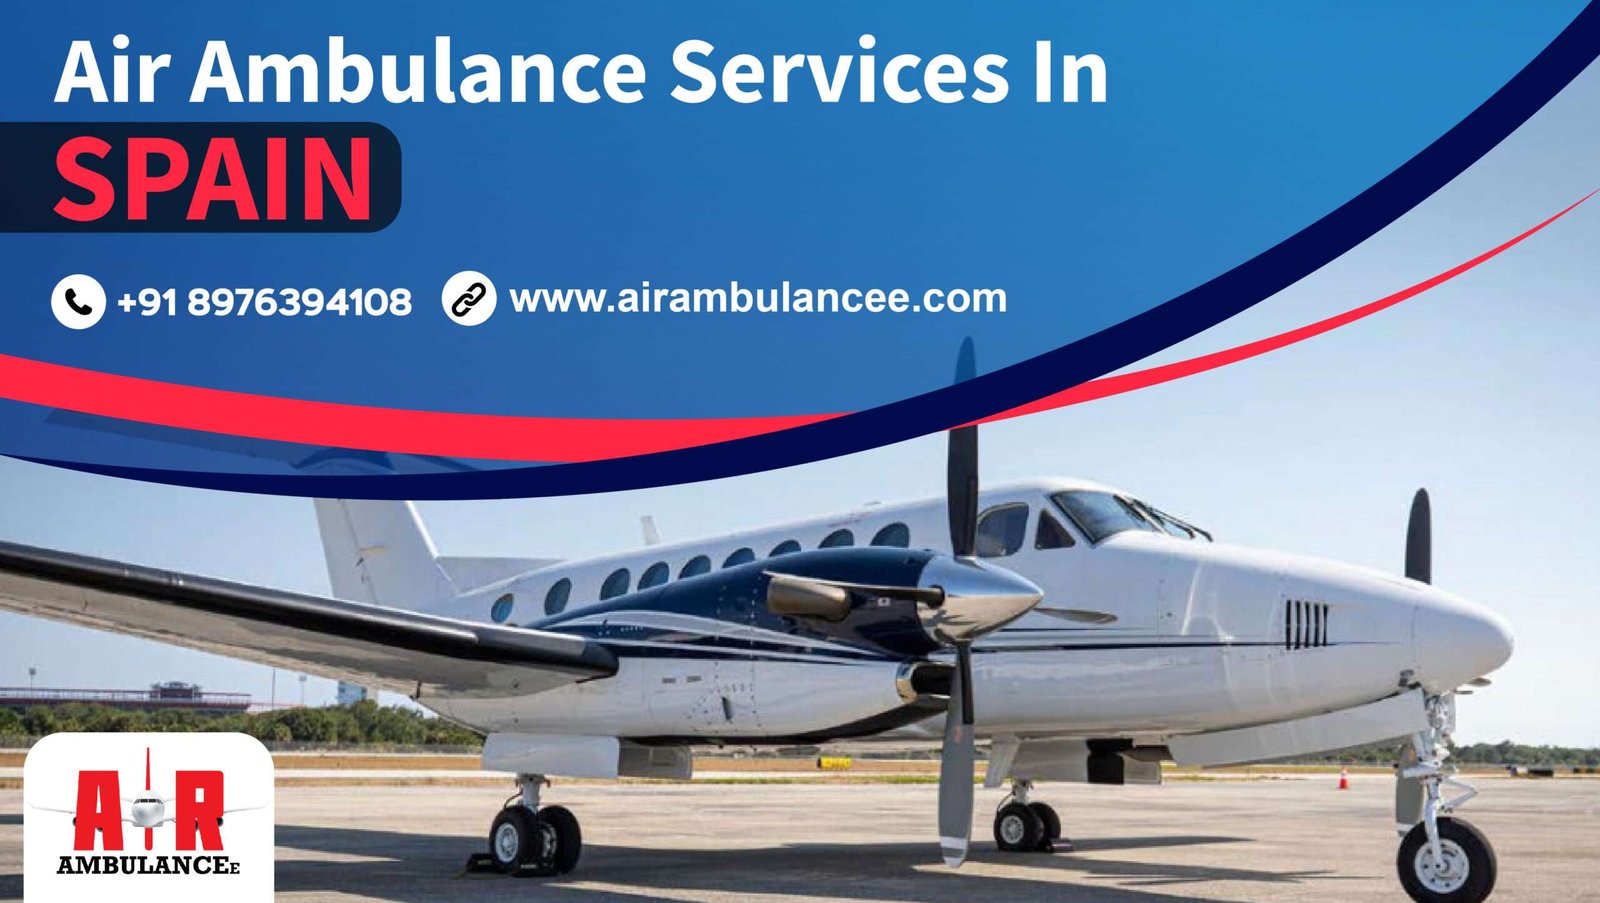 Air Ambulance Services in Spain